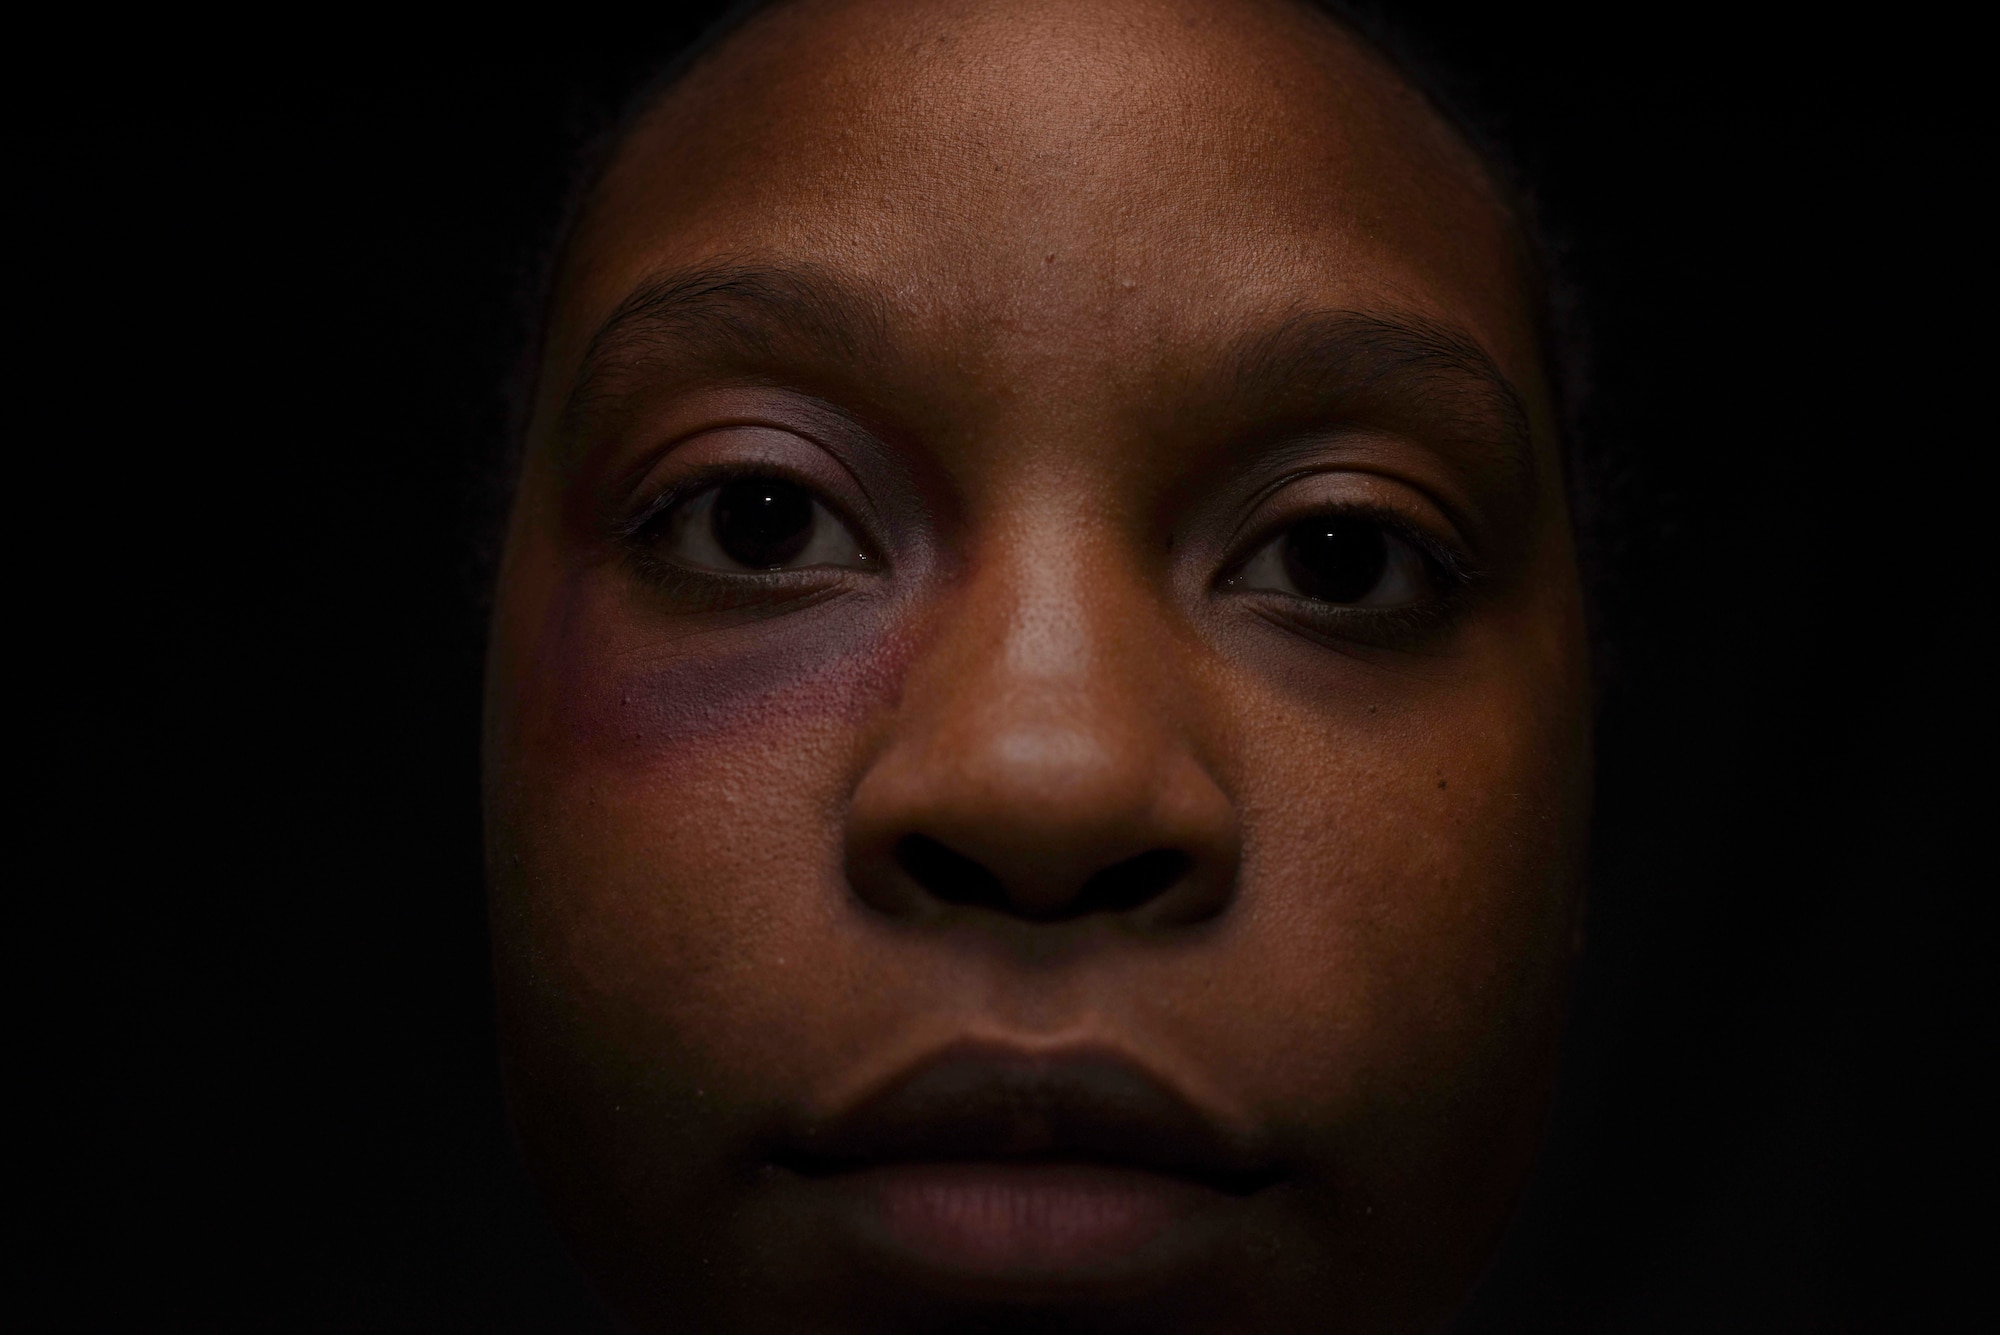 U.S. Air Force Staff Sgt. Ceaira Tinsley, 39th Air Base Wing non-commissioned officer in charge of command information, wears makeup simulating a bruise during a domestic violence awareness exercise Oct. 10, 2019, at Incirlik Air Base, Turkey. Ten Airmen from various units wore artificial scars on their faces to see what kind of reactions they would receive from their colleagues around the installation. (U.S. Air Force photo by Staff Sgt Joshua Magbanua)